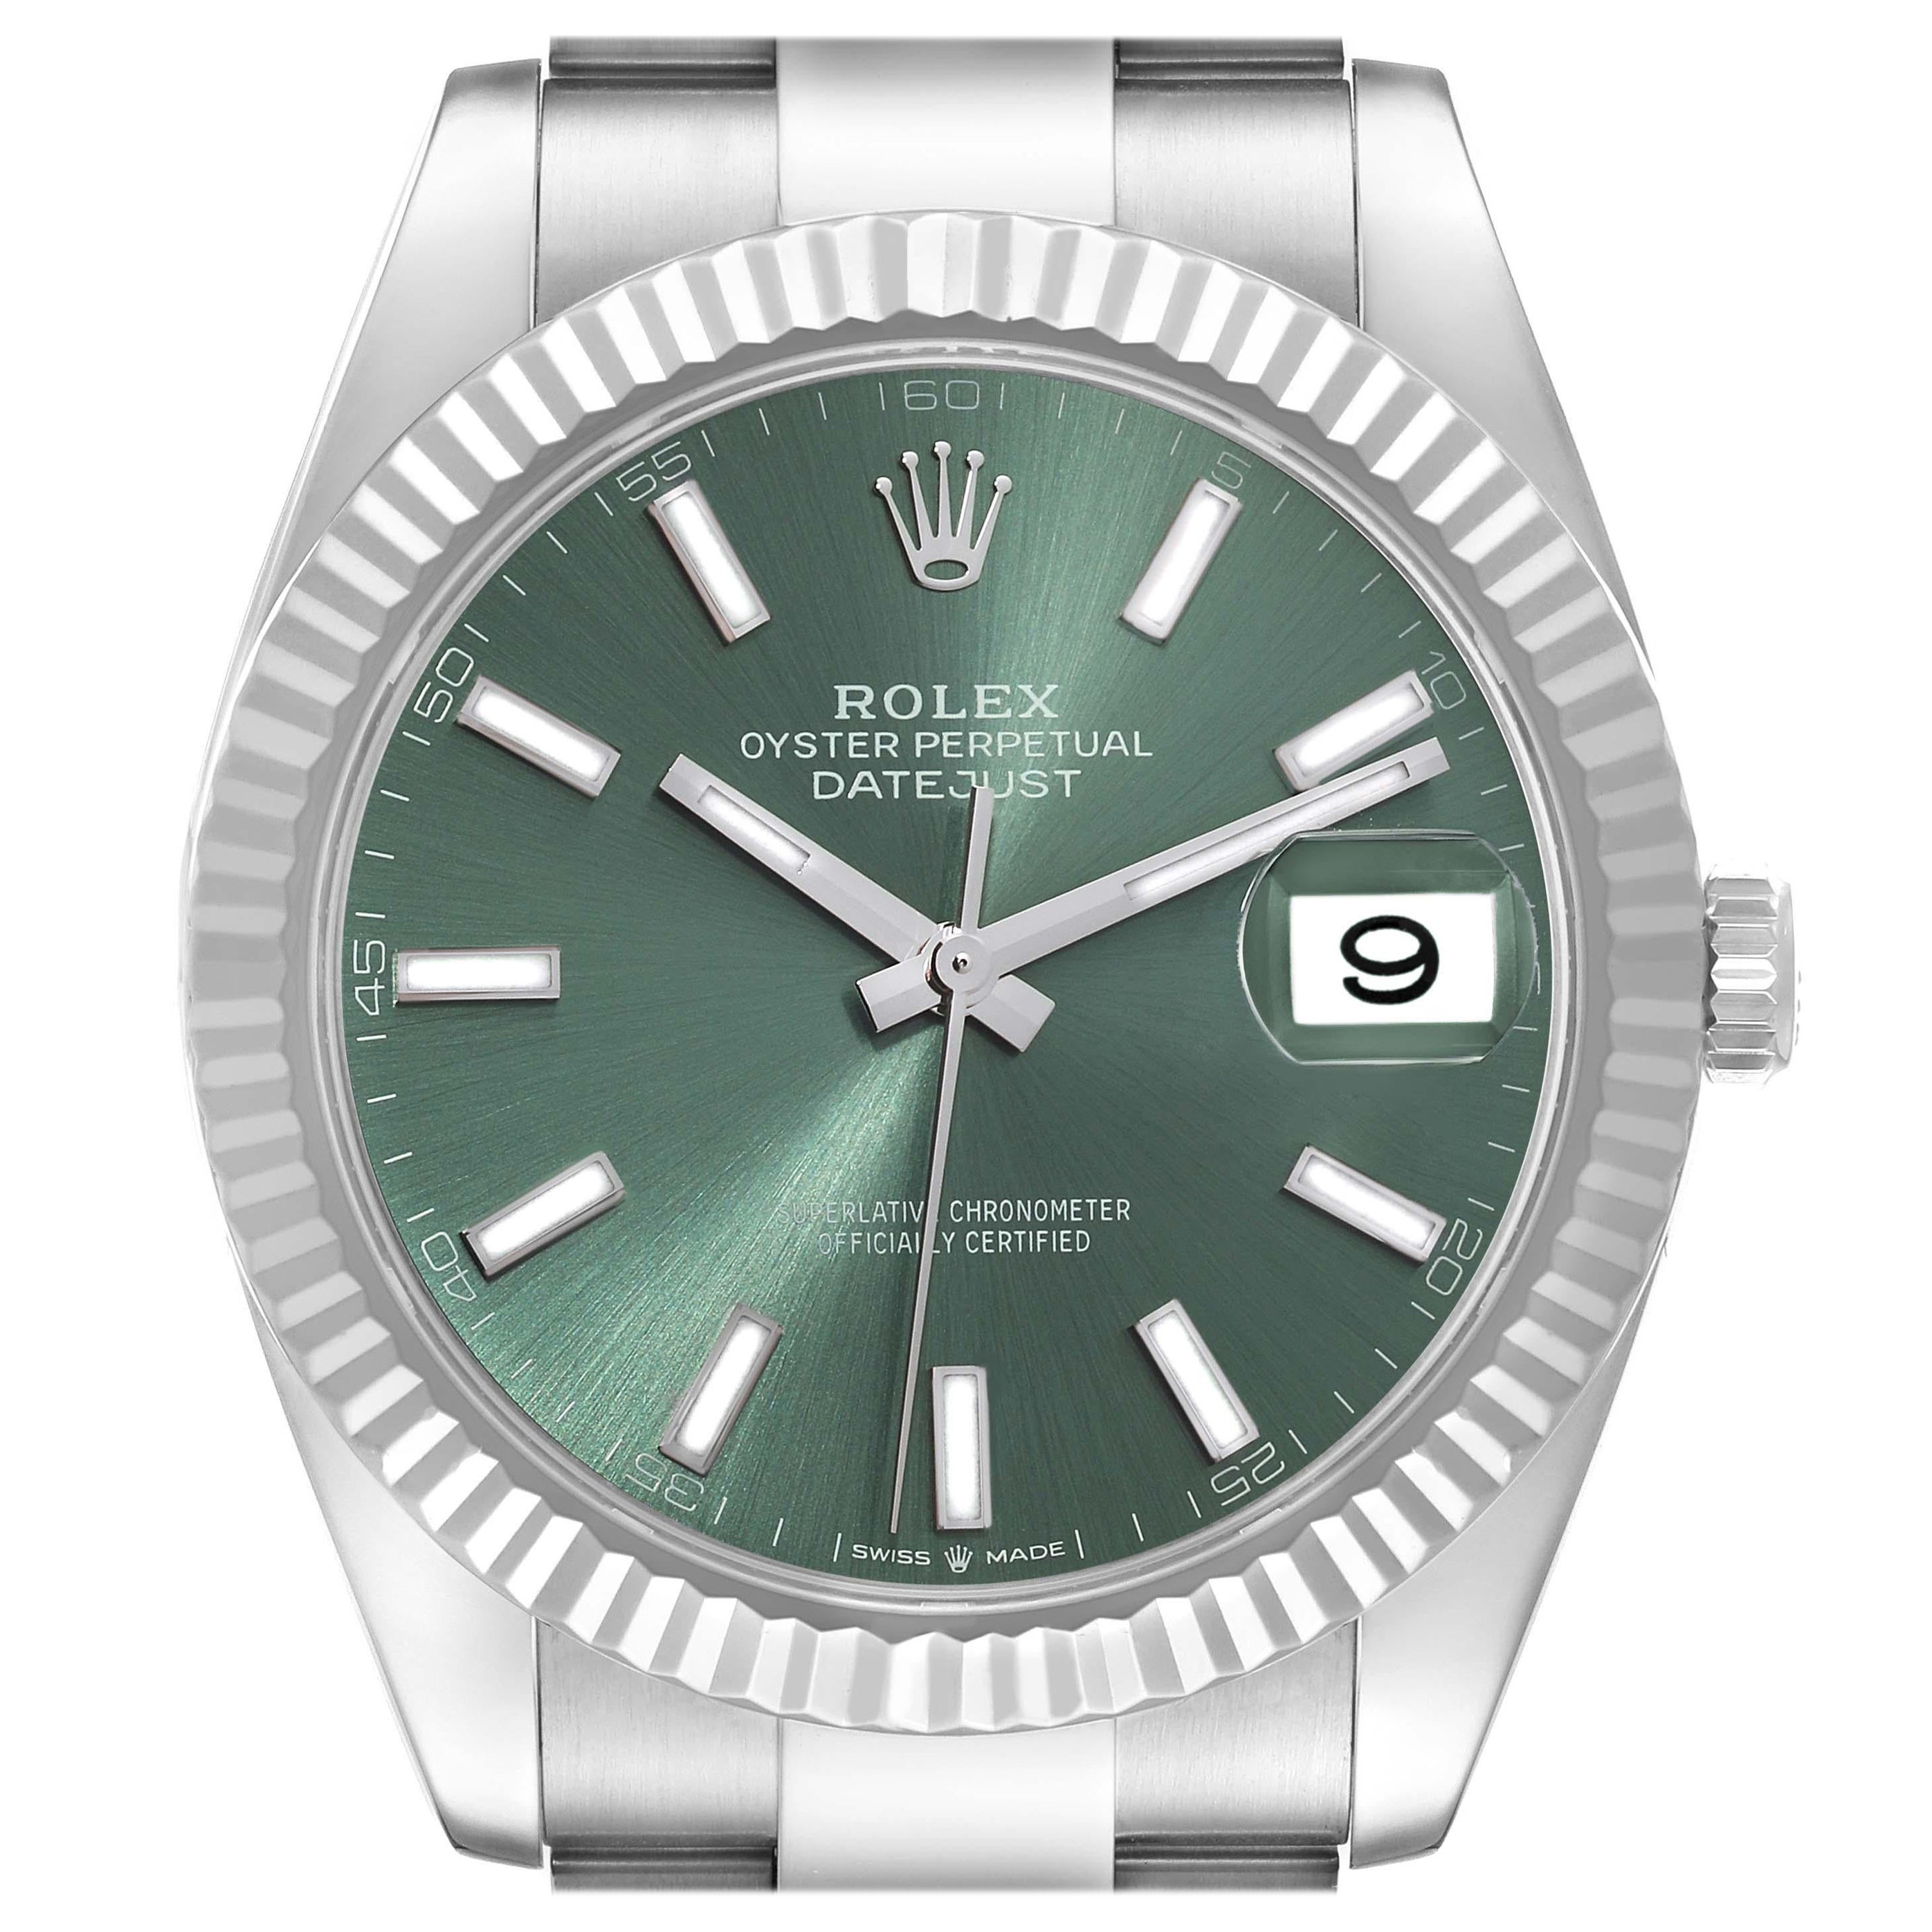 Rolex Datejust 41 Steel White Gold Mint Green Dial Mens Watch 126334 For Sale